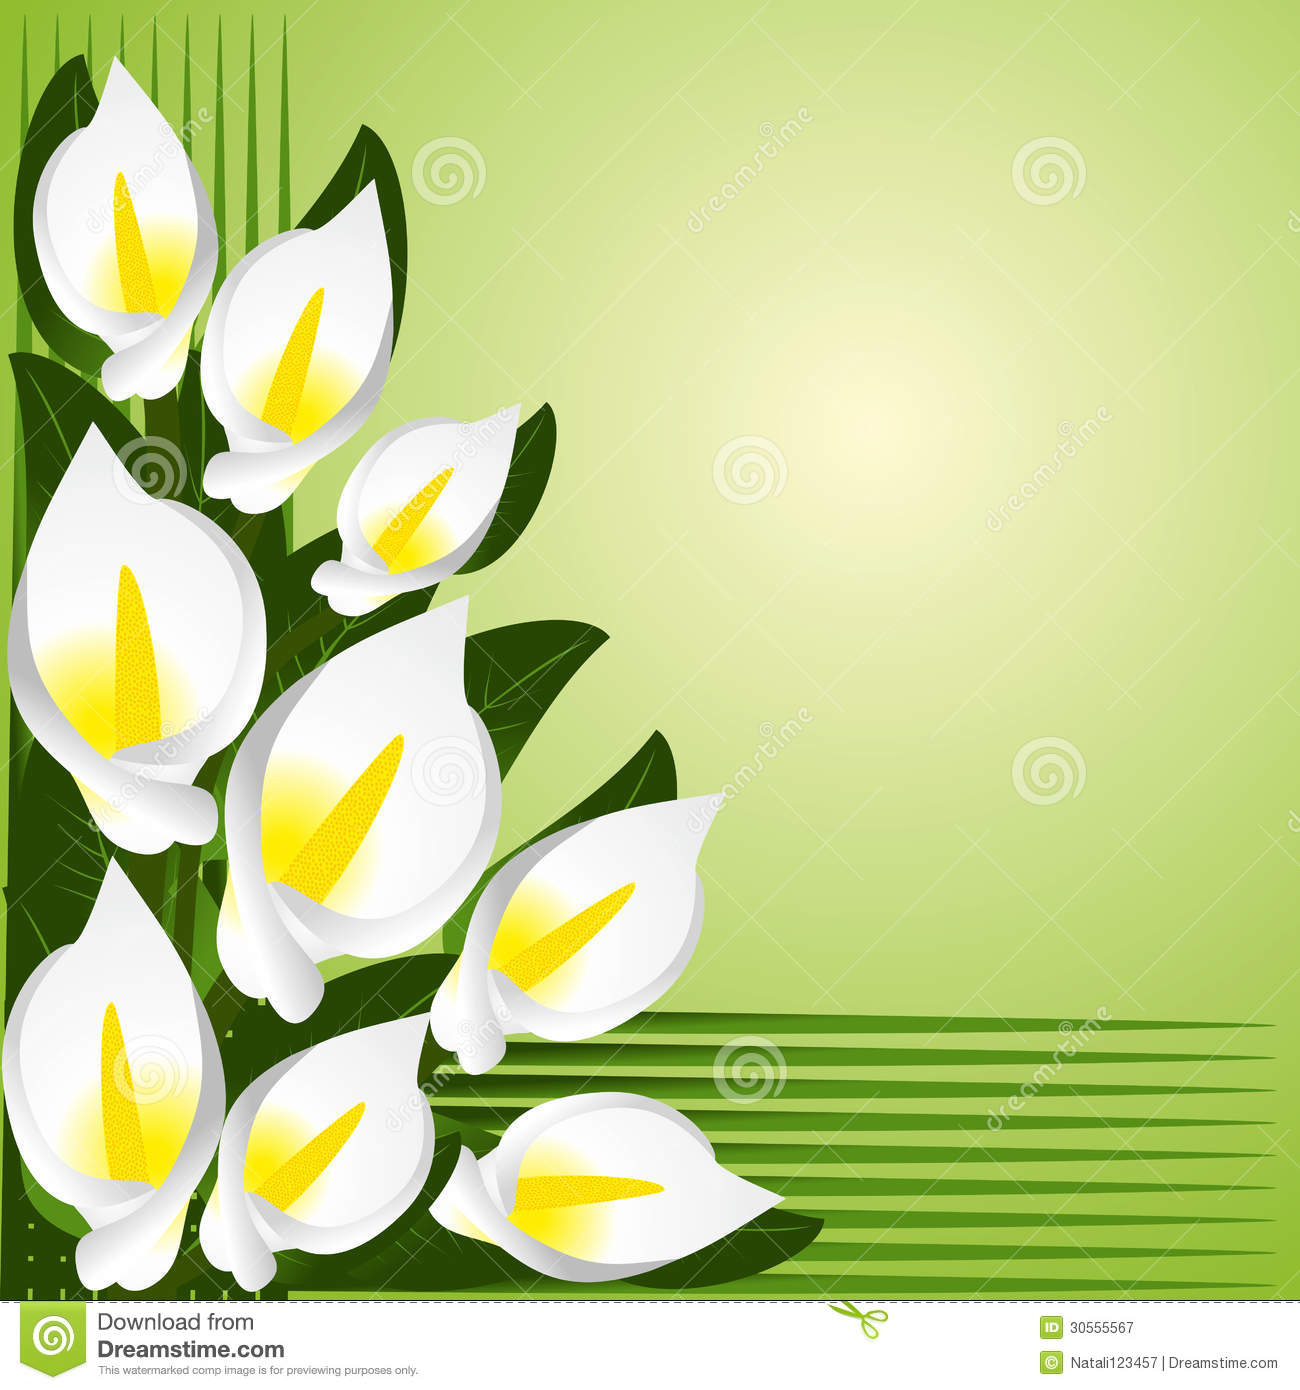 Calla Lily Wallpaper Border Flower With